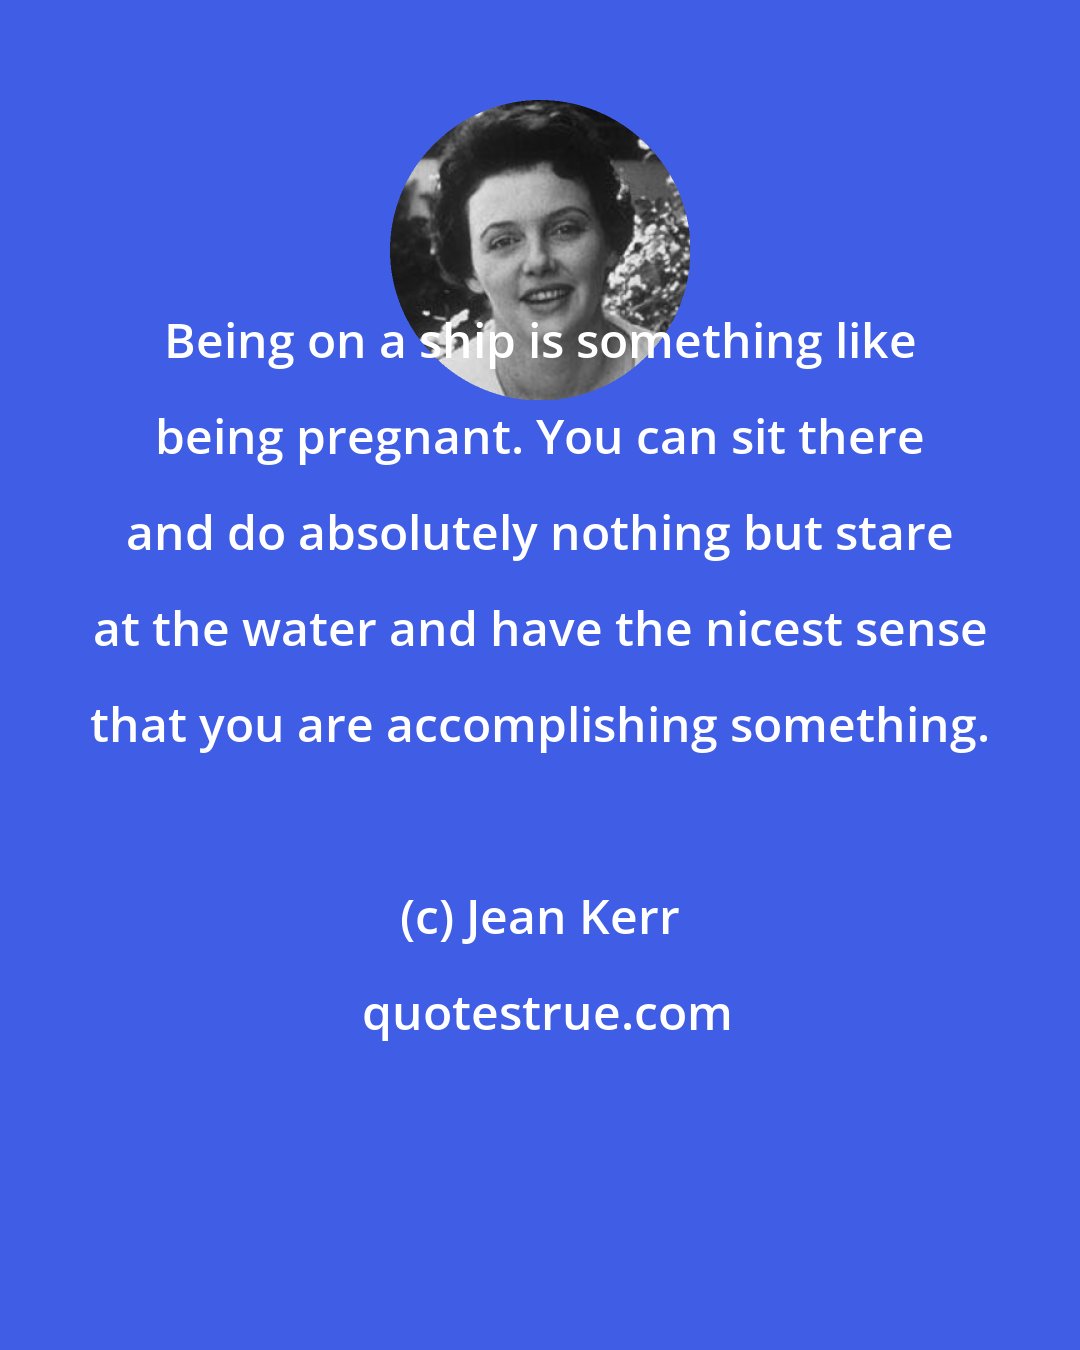 Jean Kerr: Being on a ship is something like being pregnant. You can sit there and do absolutely nothing but stare at the water and have the nicest sense that you are accomplishing something.